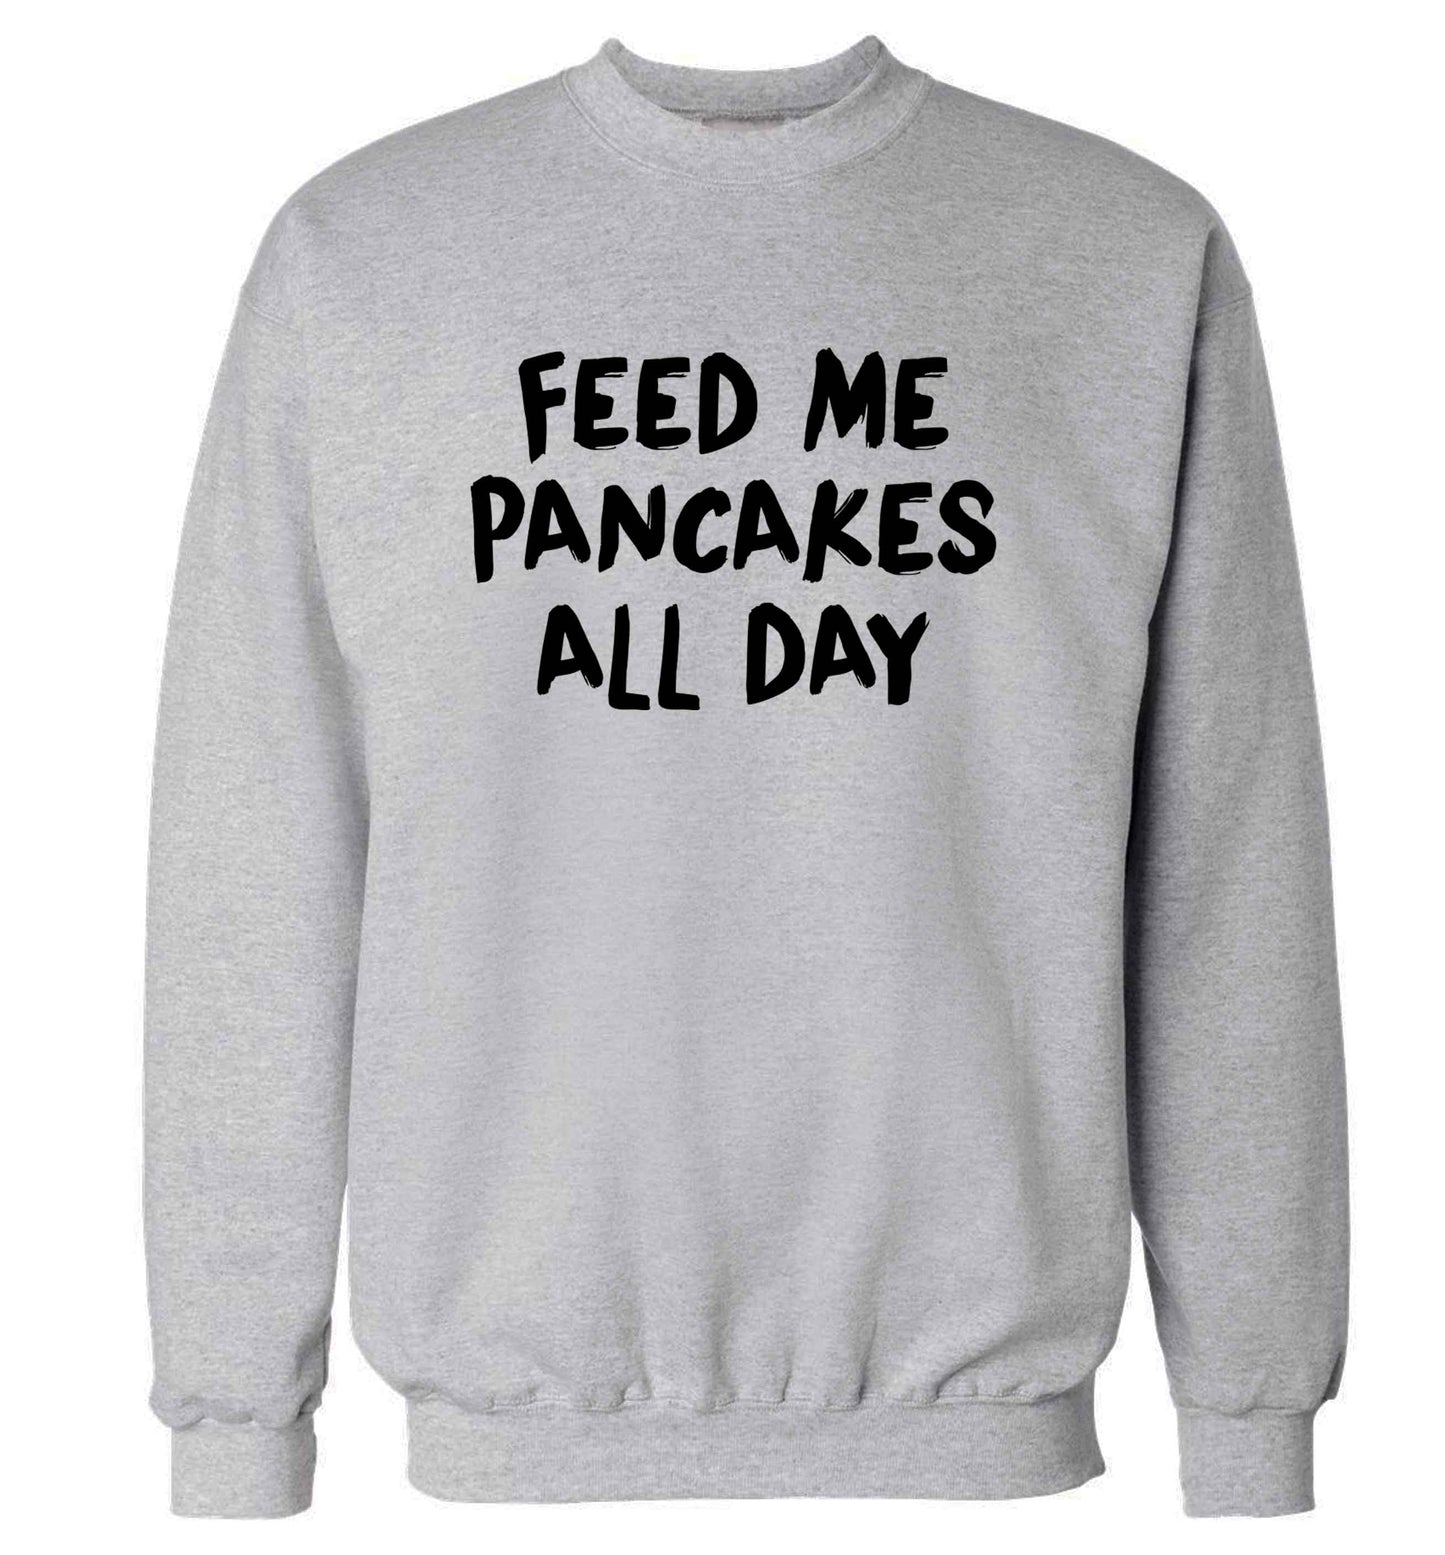 Feed me pancakes all day adult's unisex grey sweater 2XL